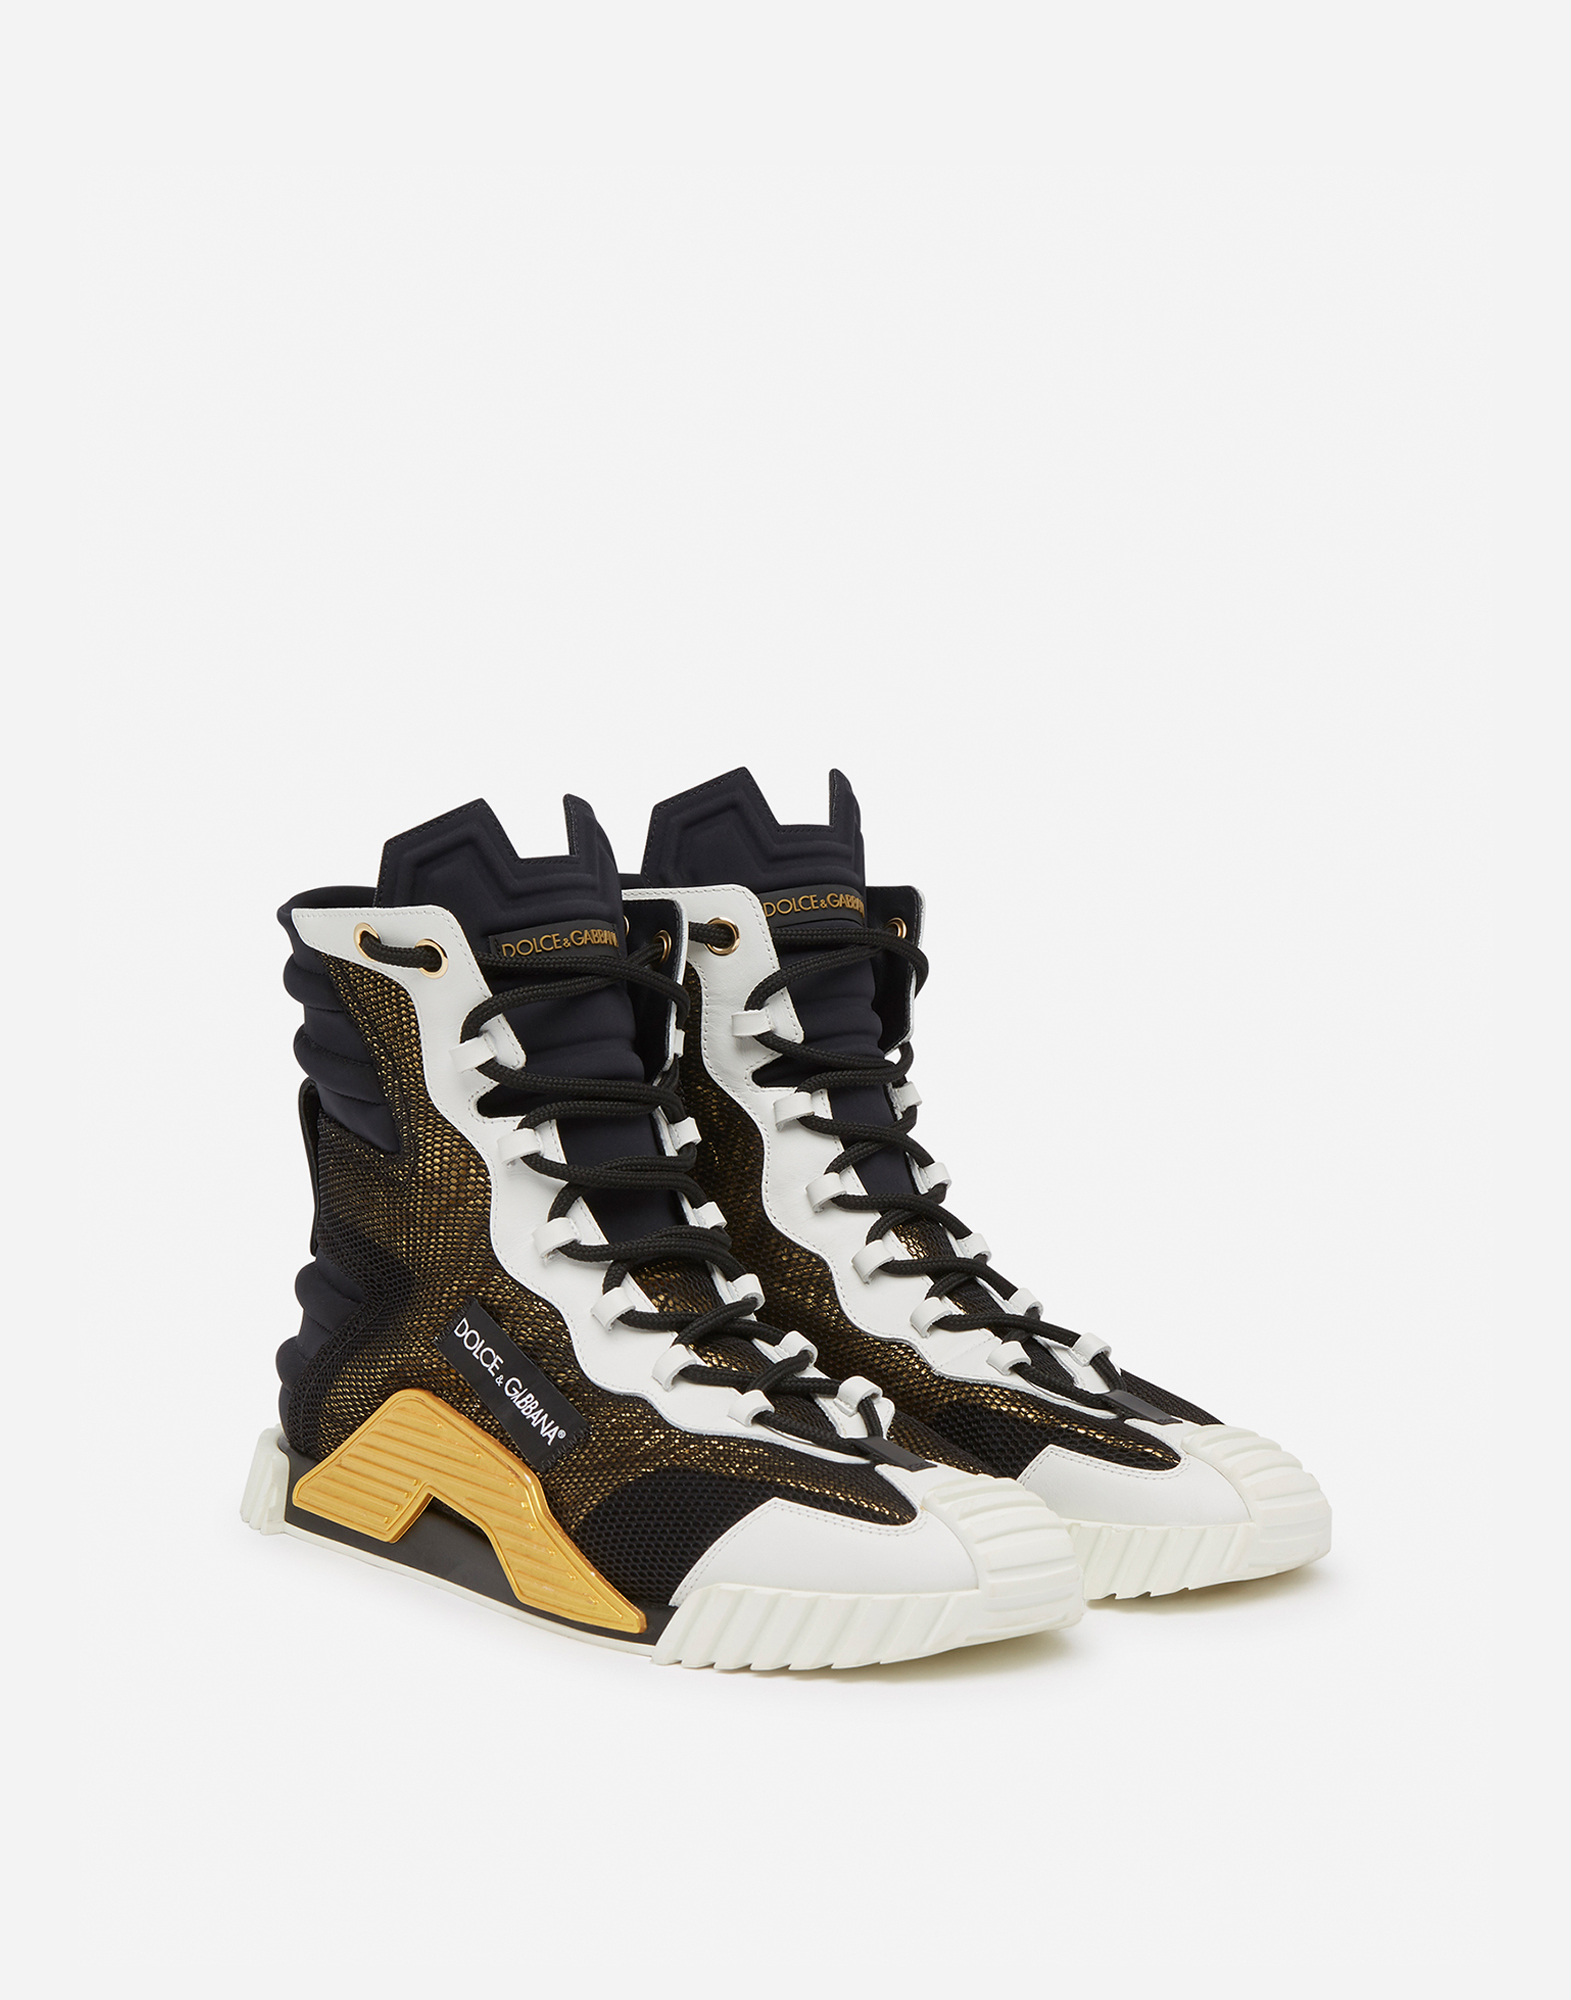 High top NS1 sneakers in mixed materials